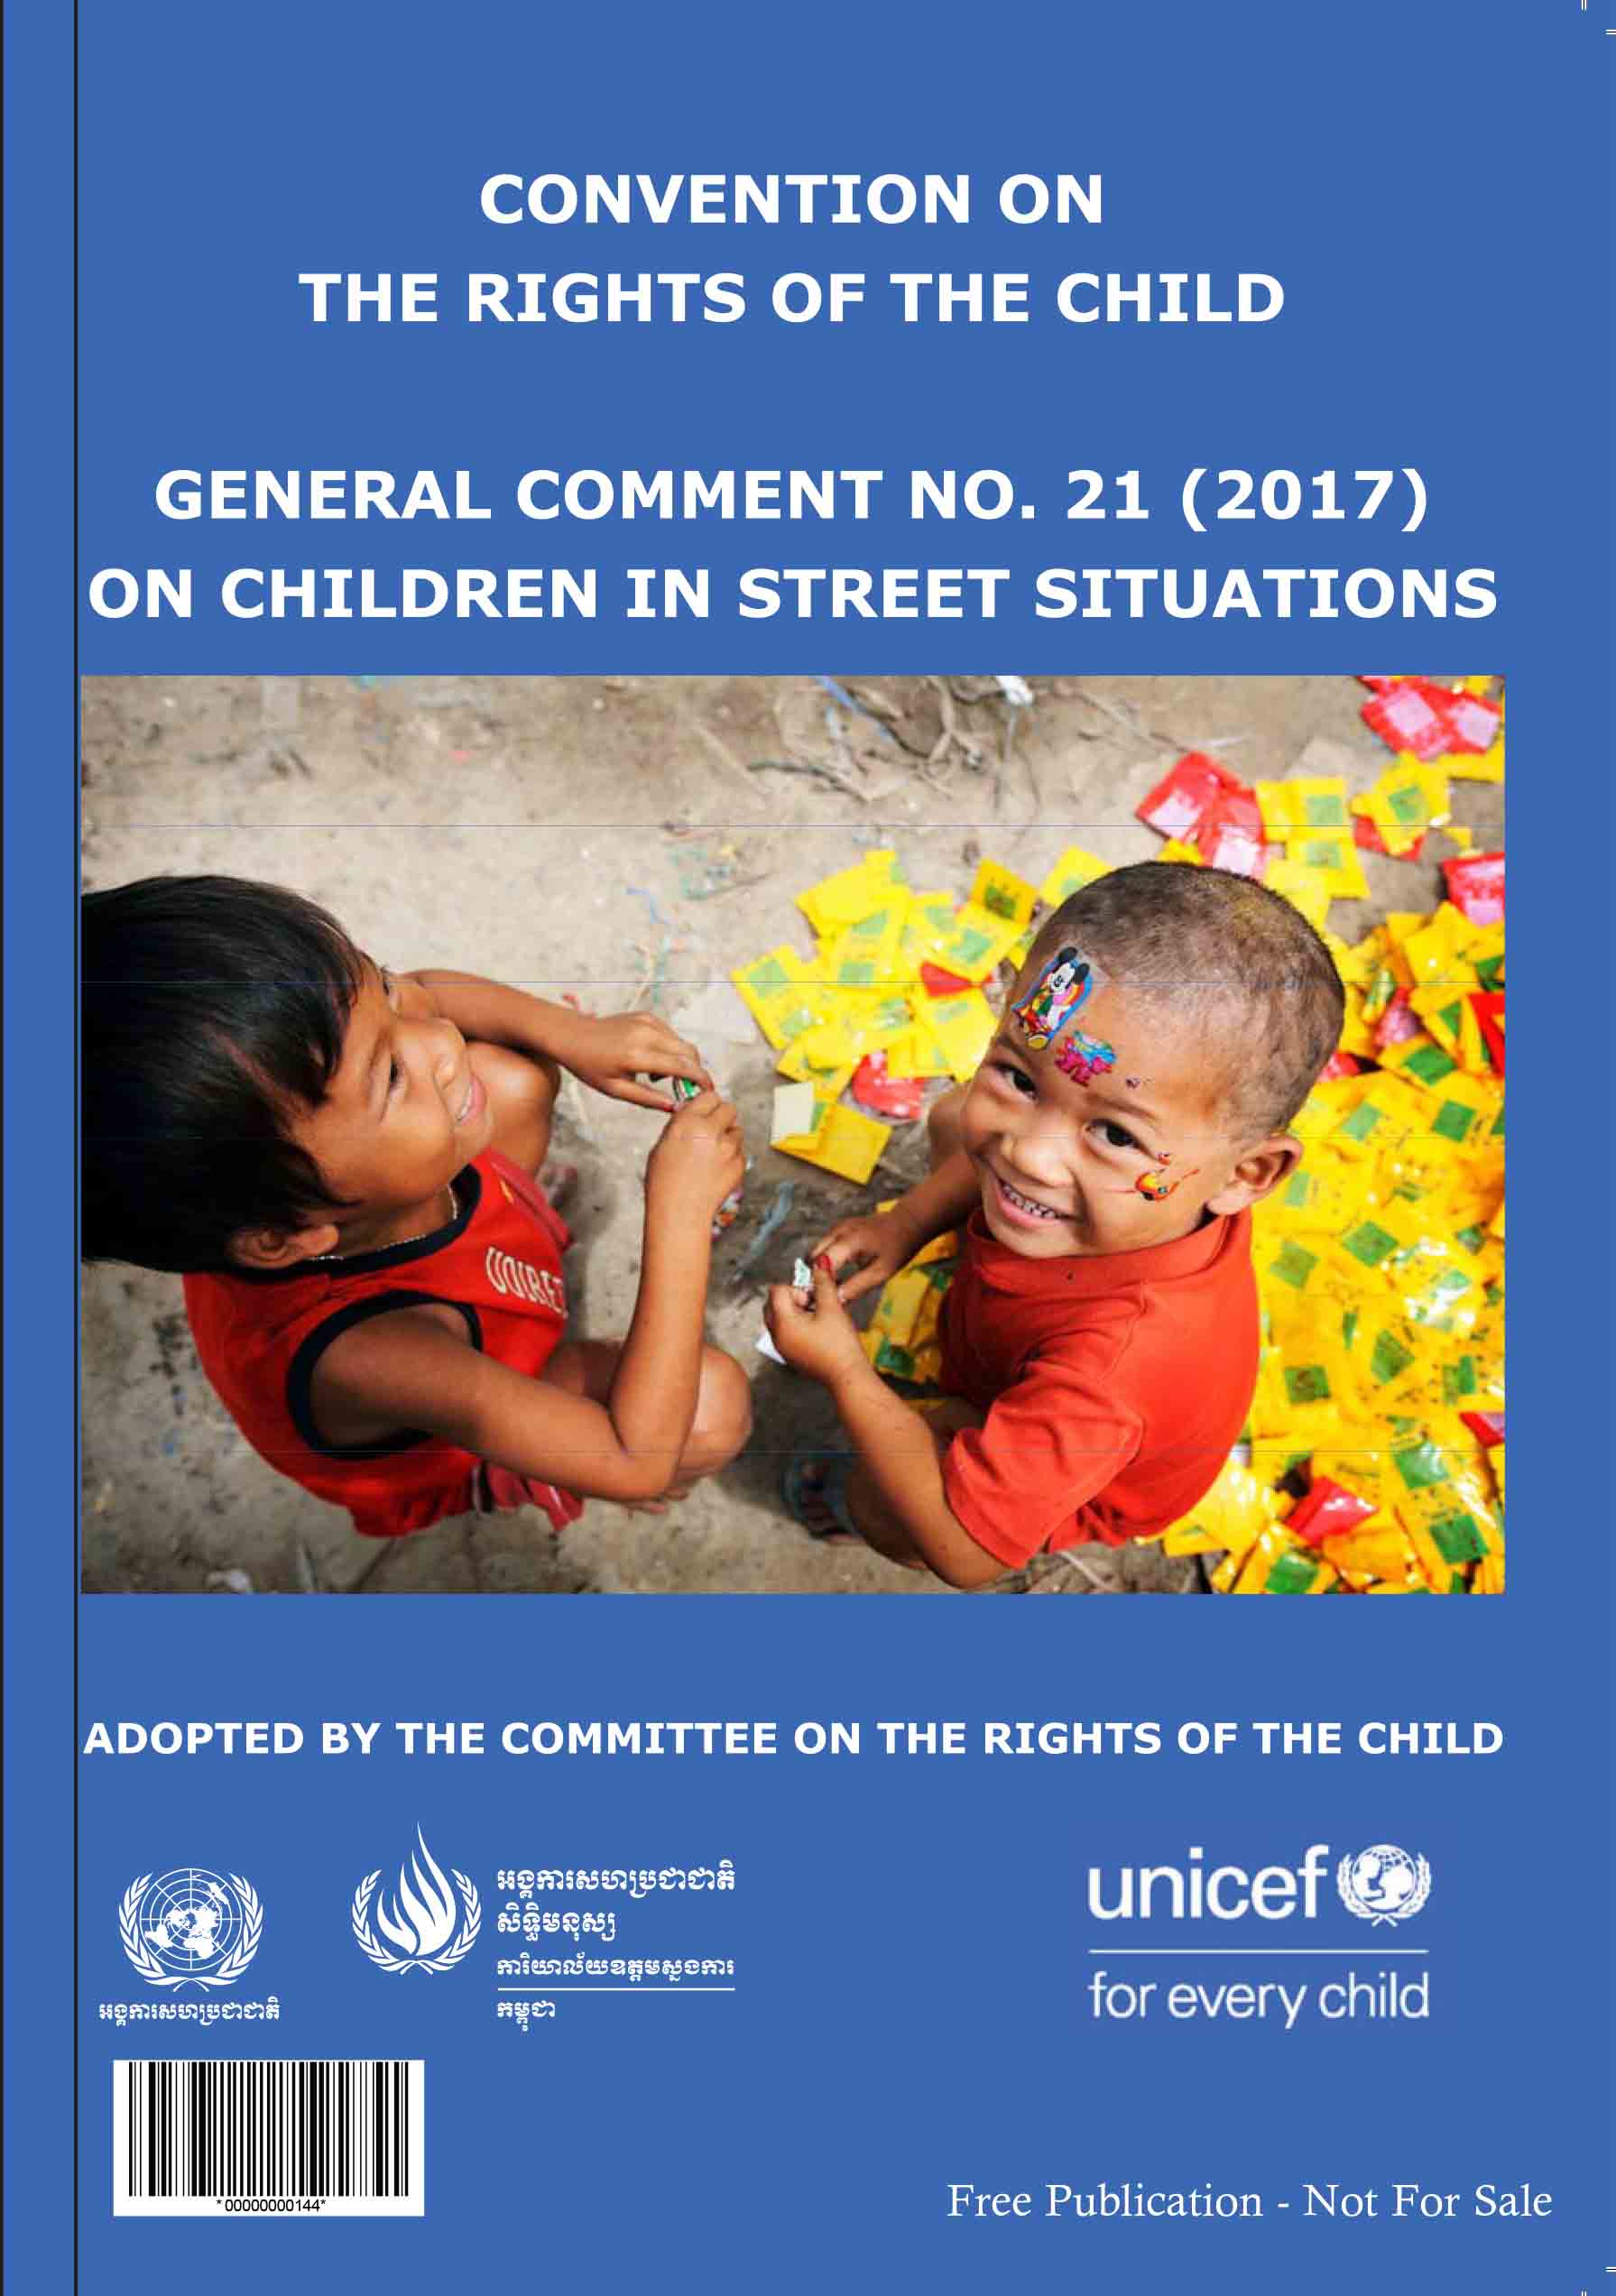 General comment No. 21 (2017) on children in street situations